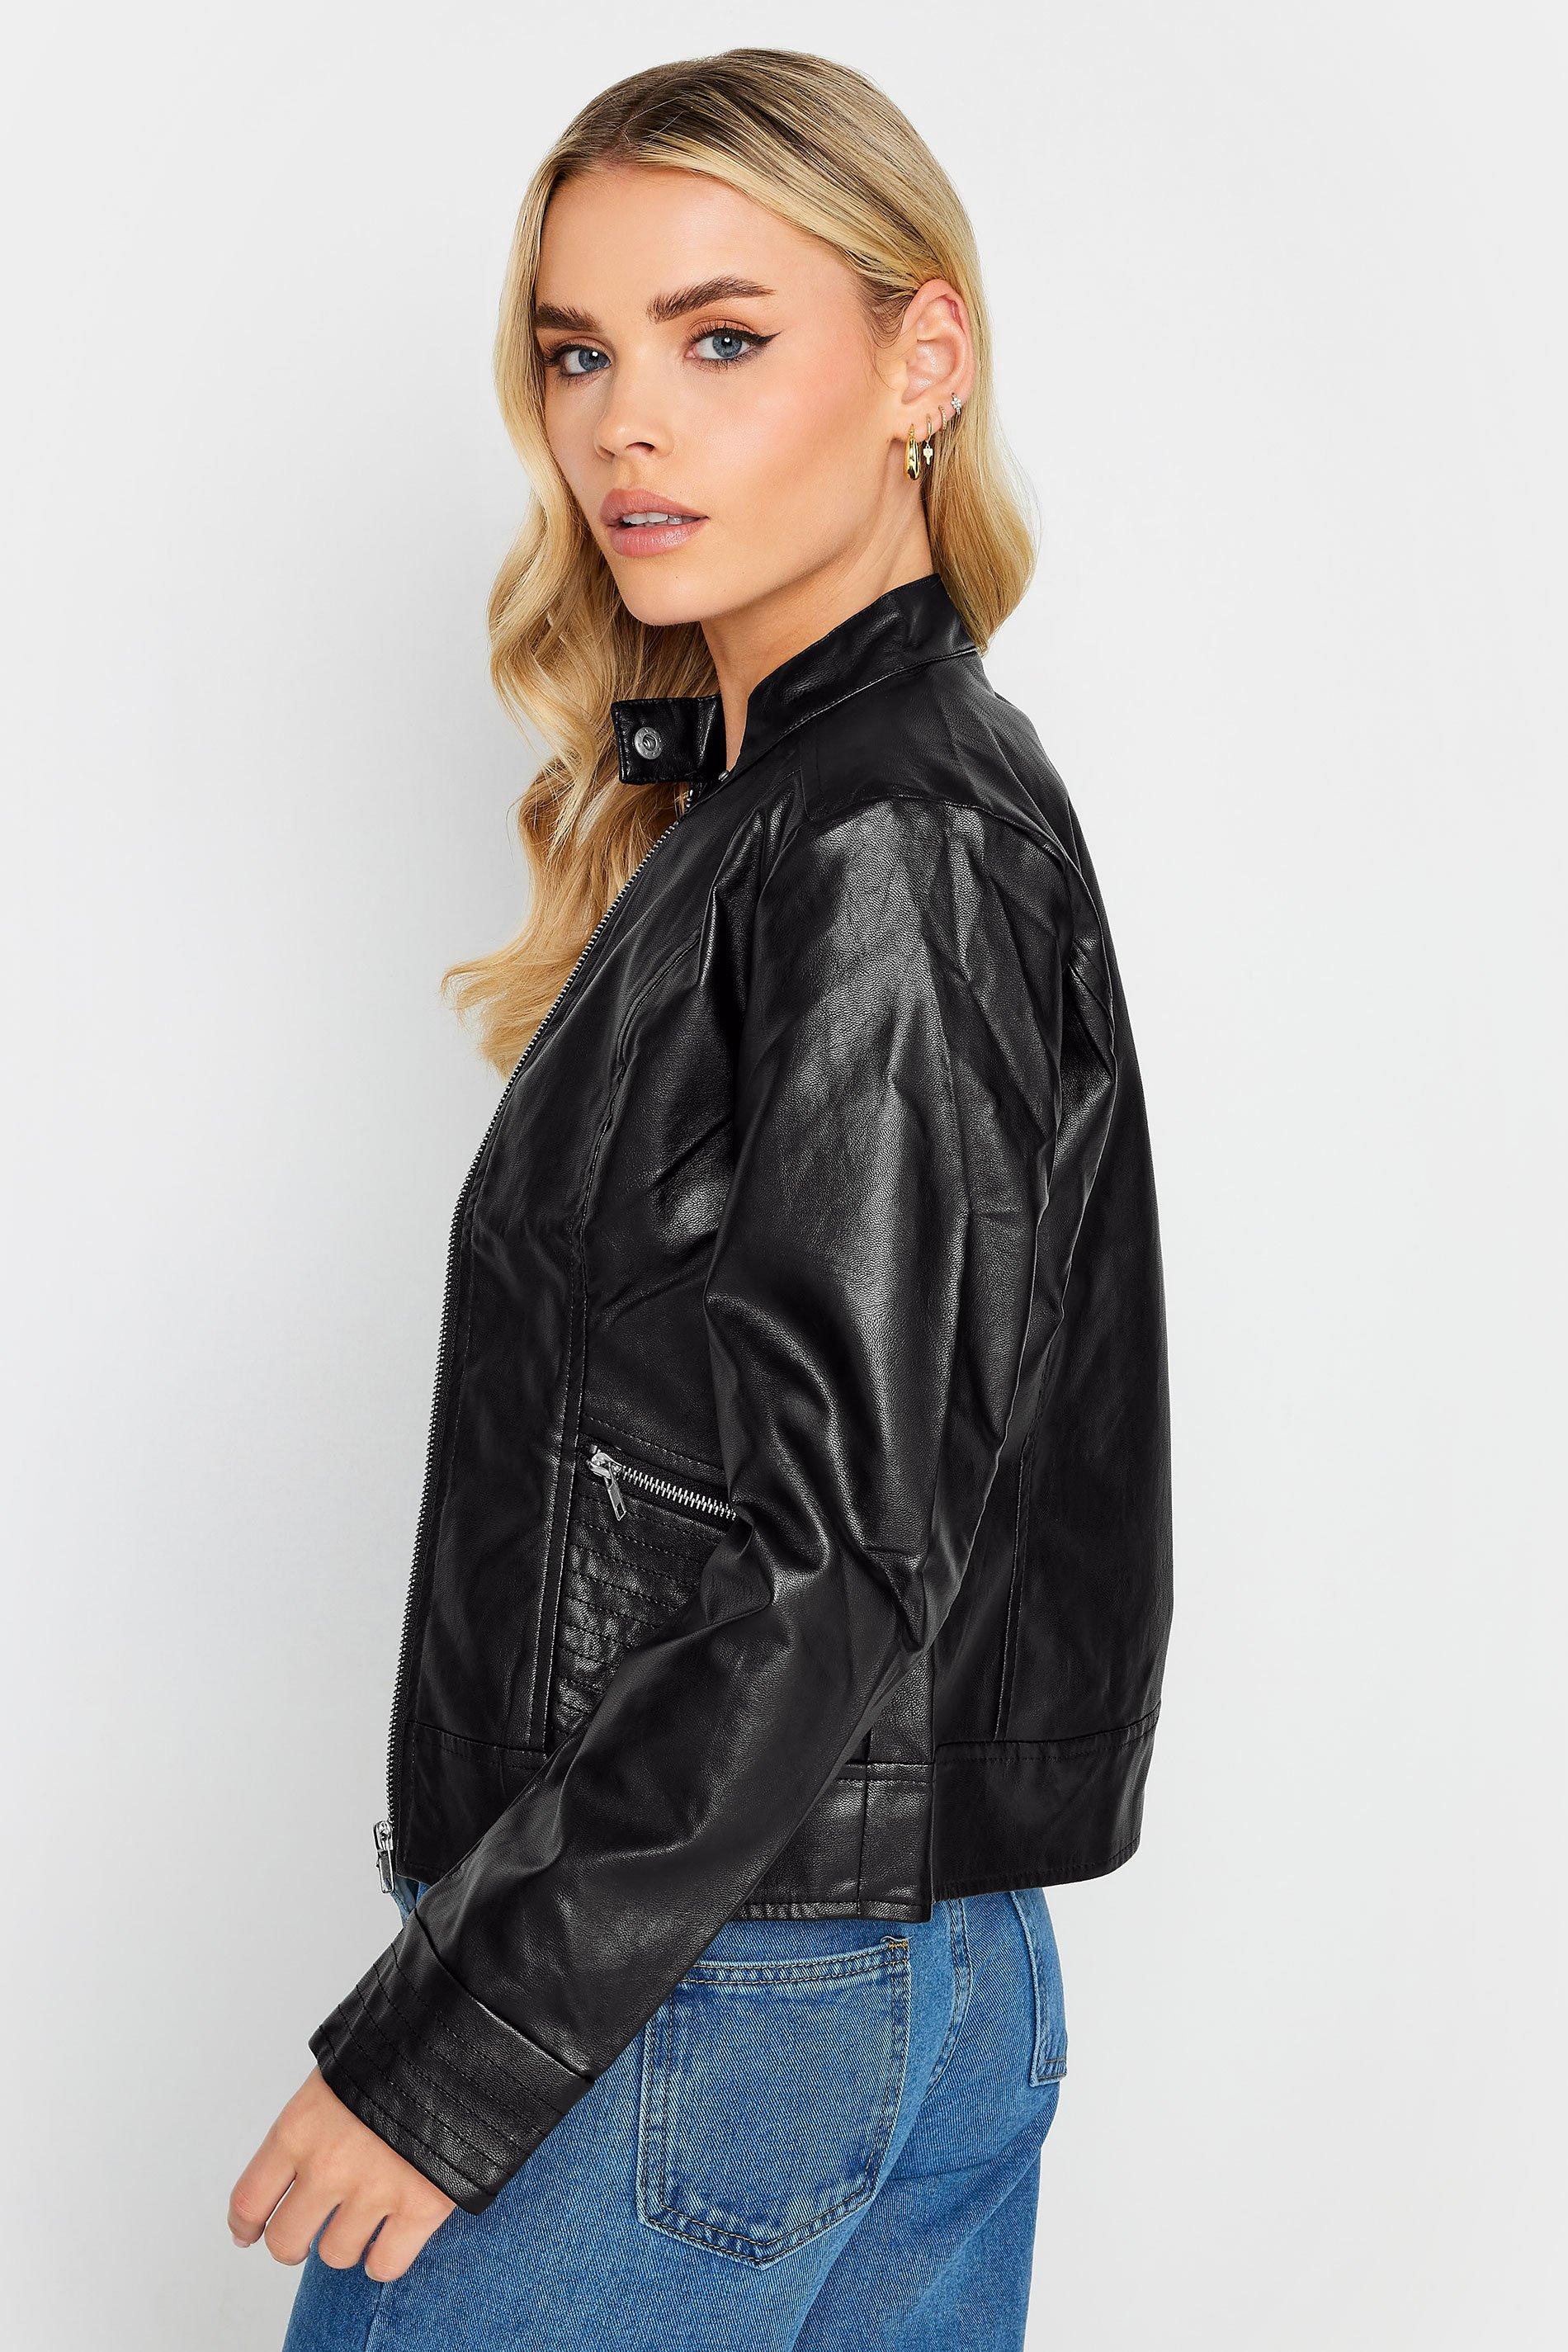 RSQ Womens Destressed Faux Leather Bomber Jacket - BLACK